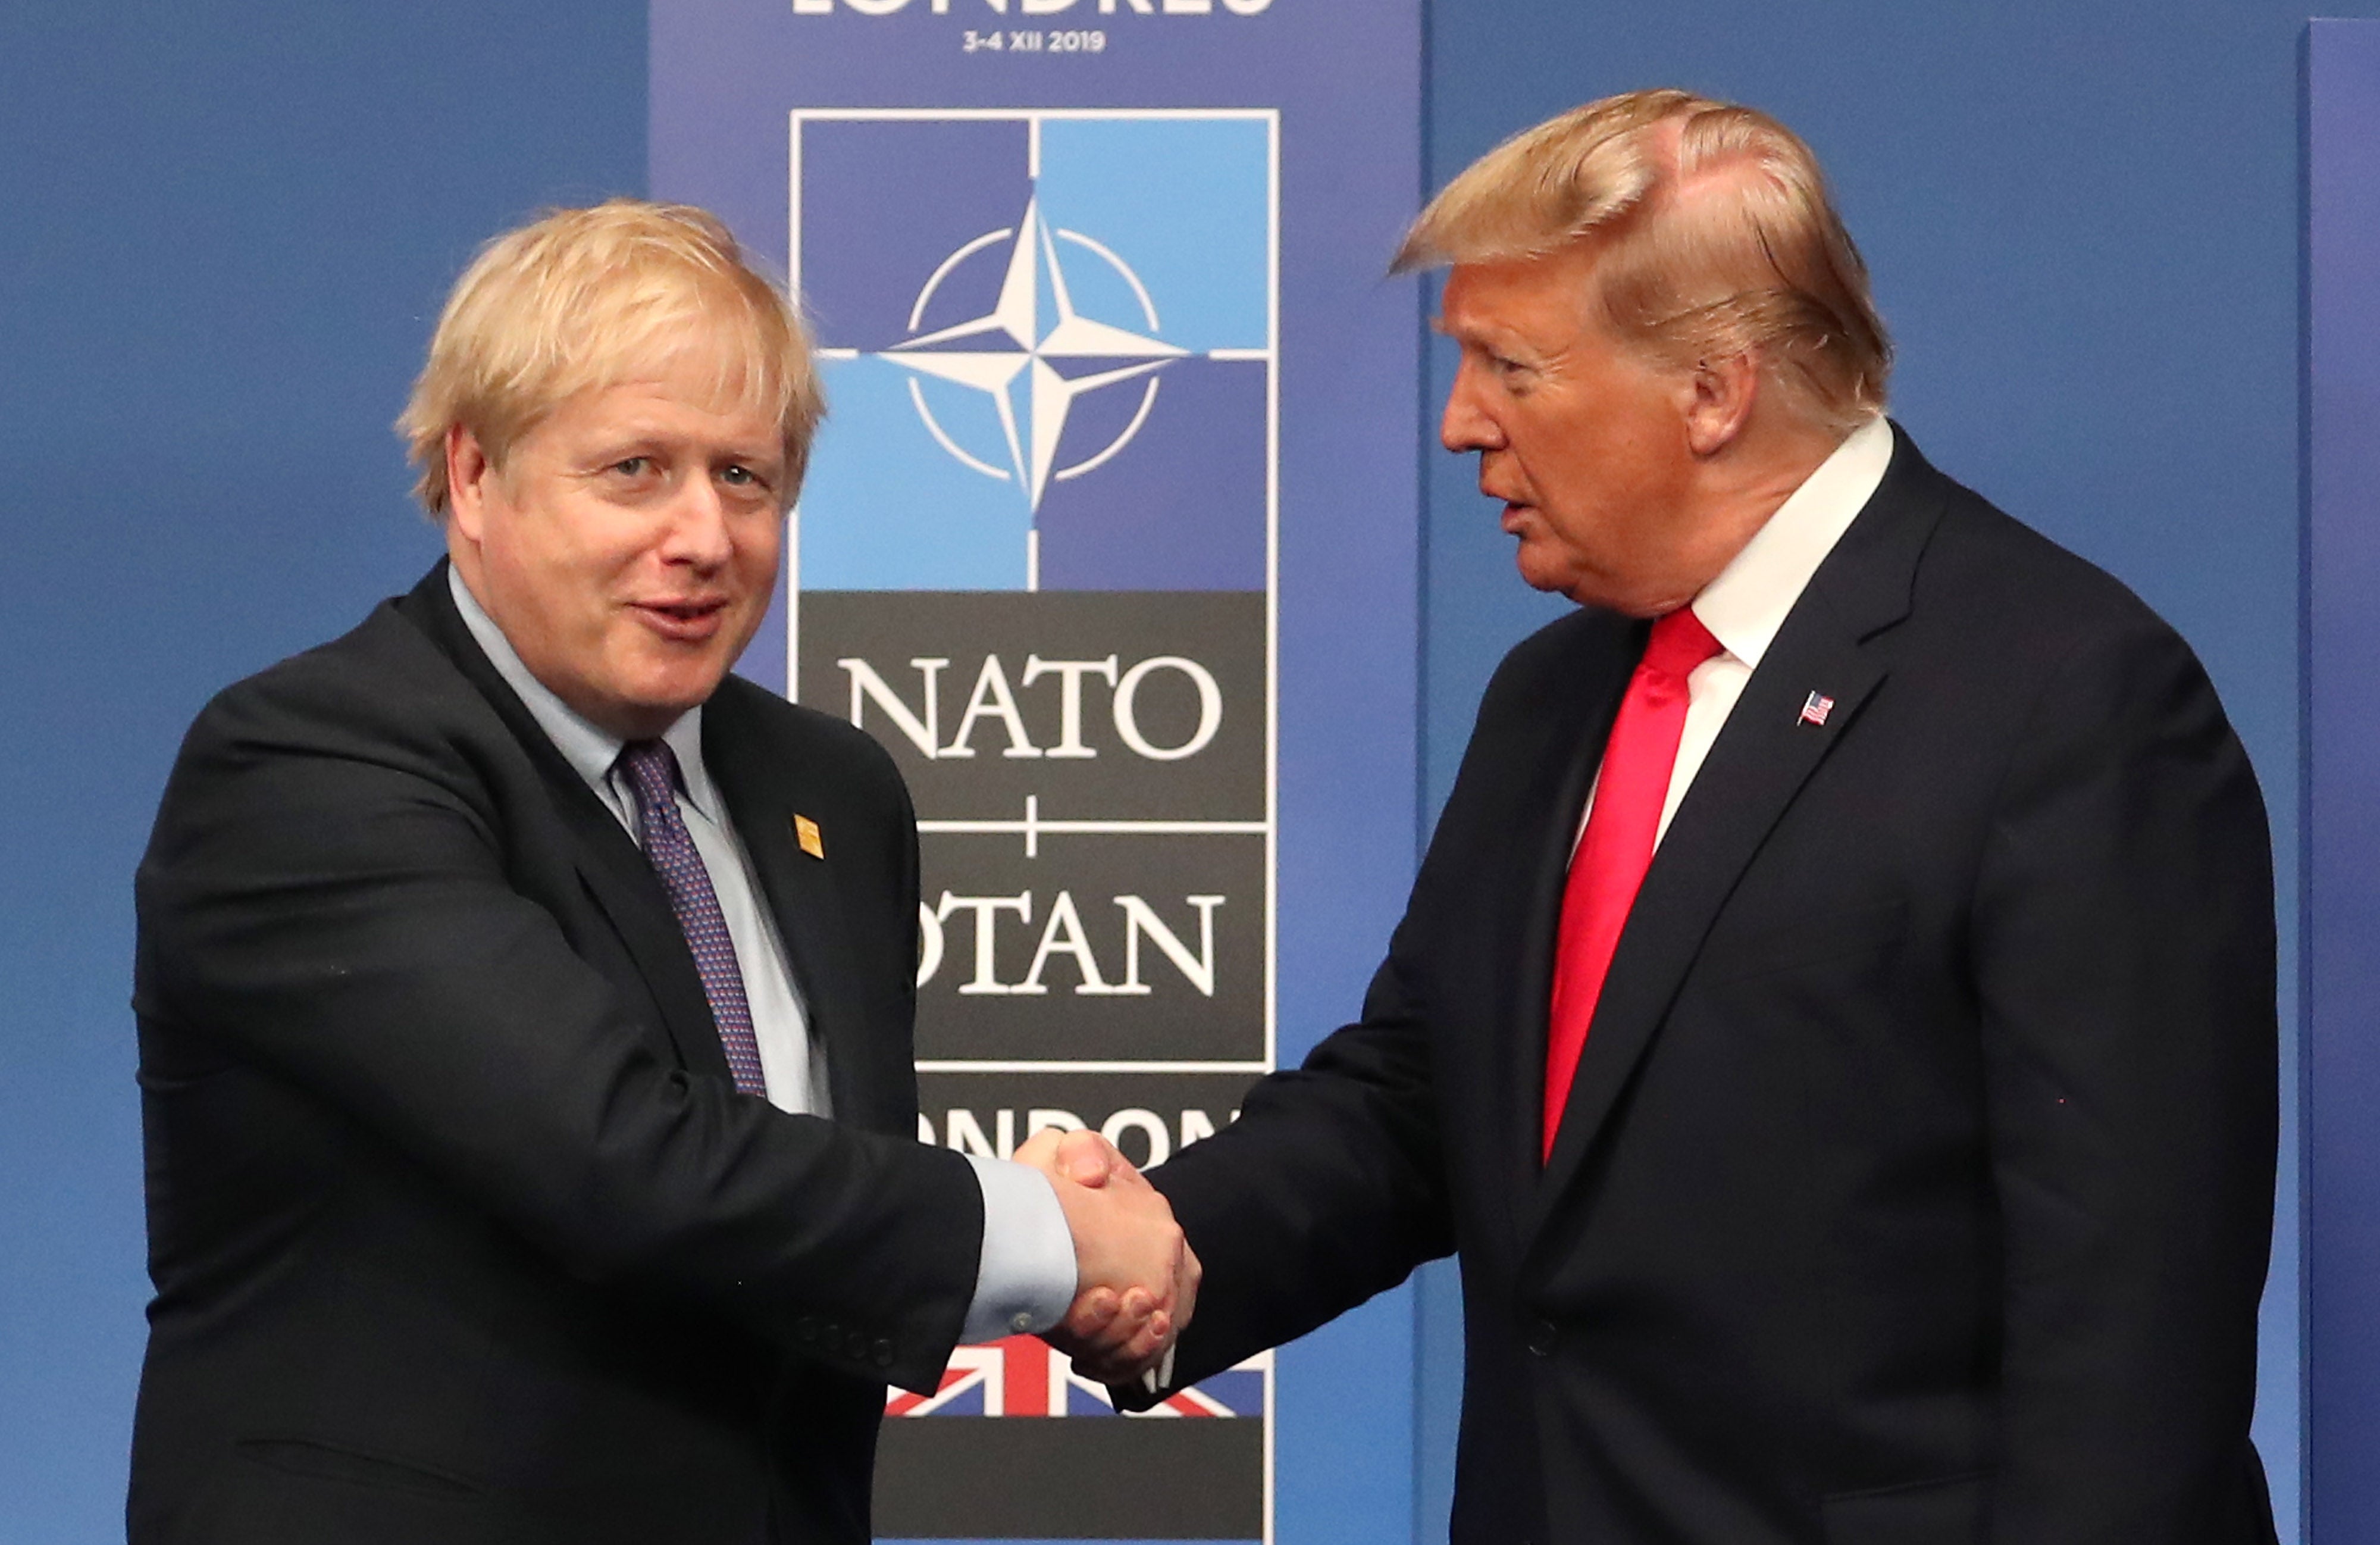 Boris Johnson made the comments praising Donald Trump when he was foreign secretary